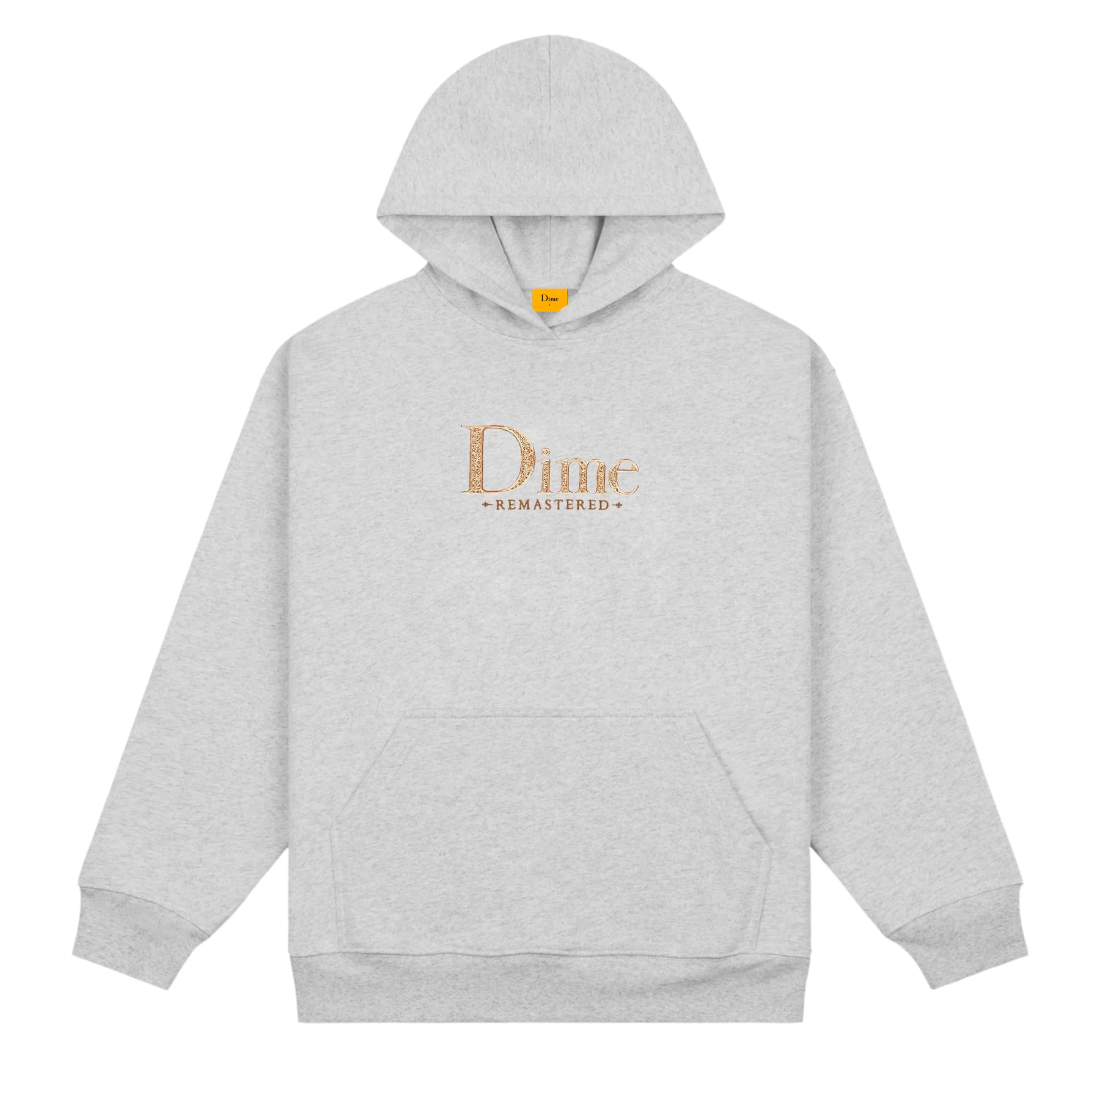 【Dime】Classic Remastered Hoodie - Heather Gray